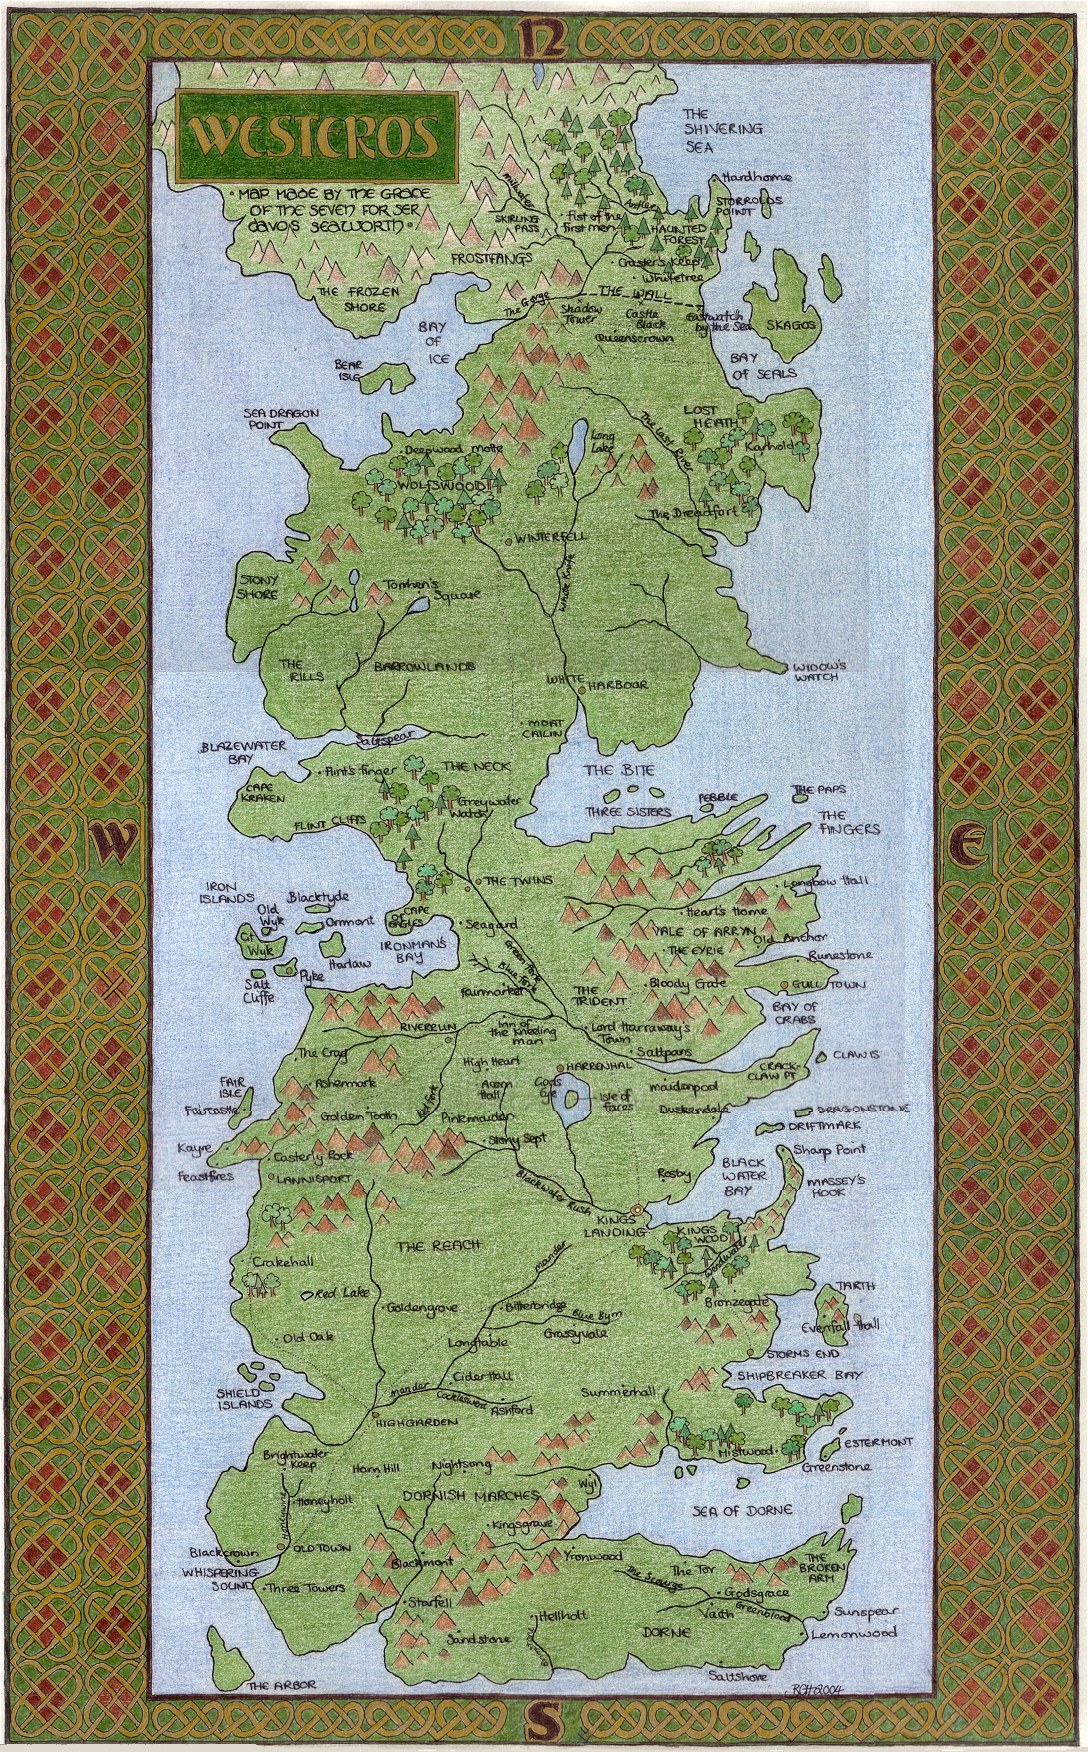 Westeros Map Image Pic HD Wallpaper